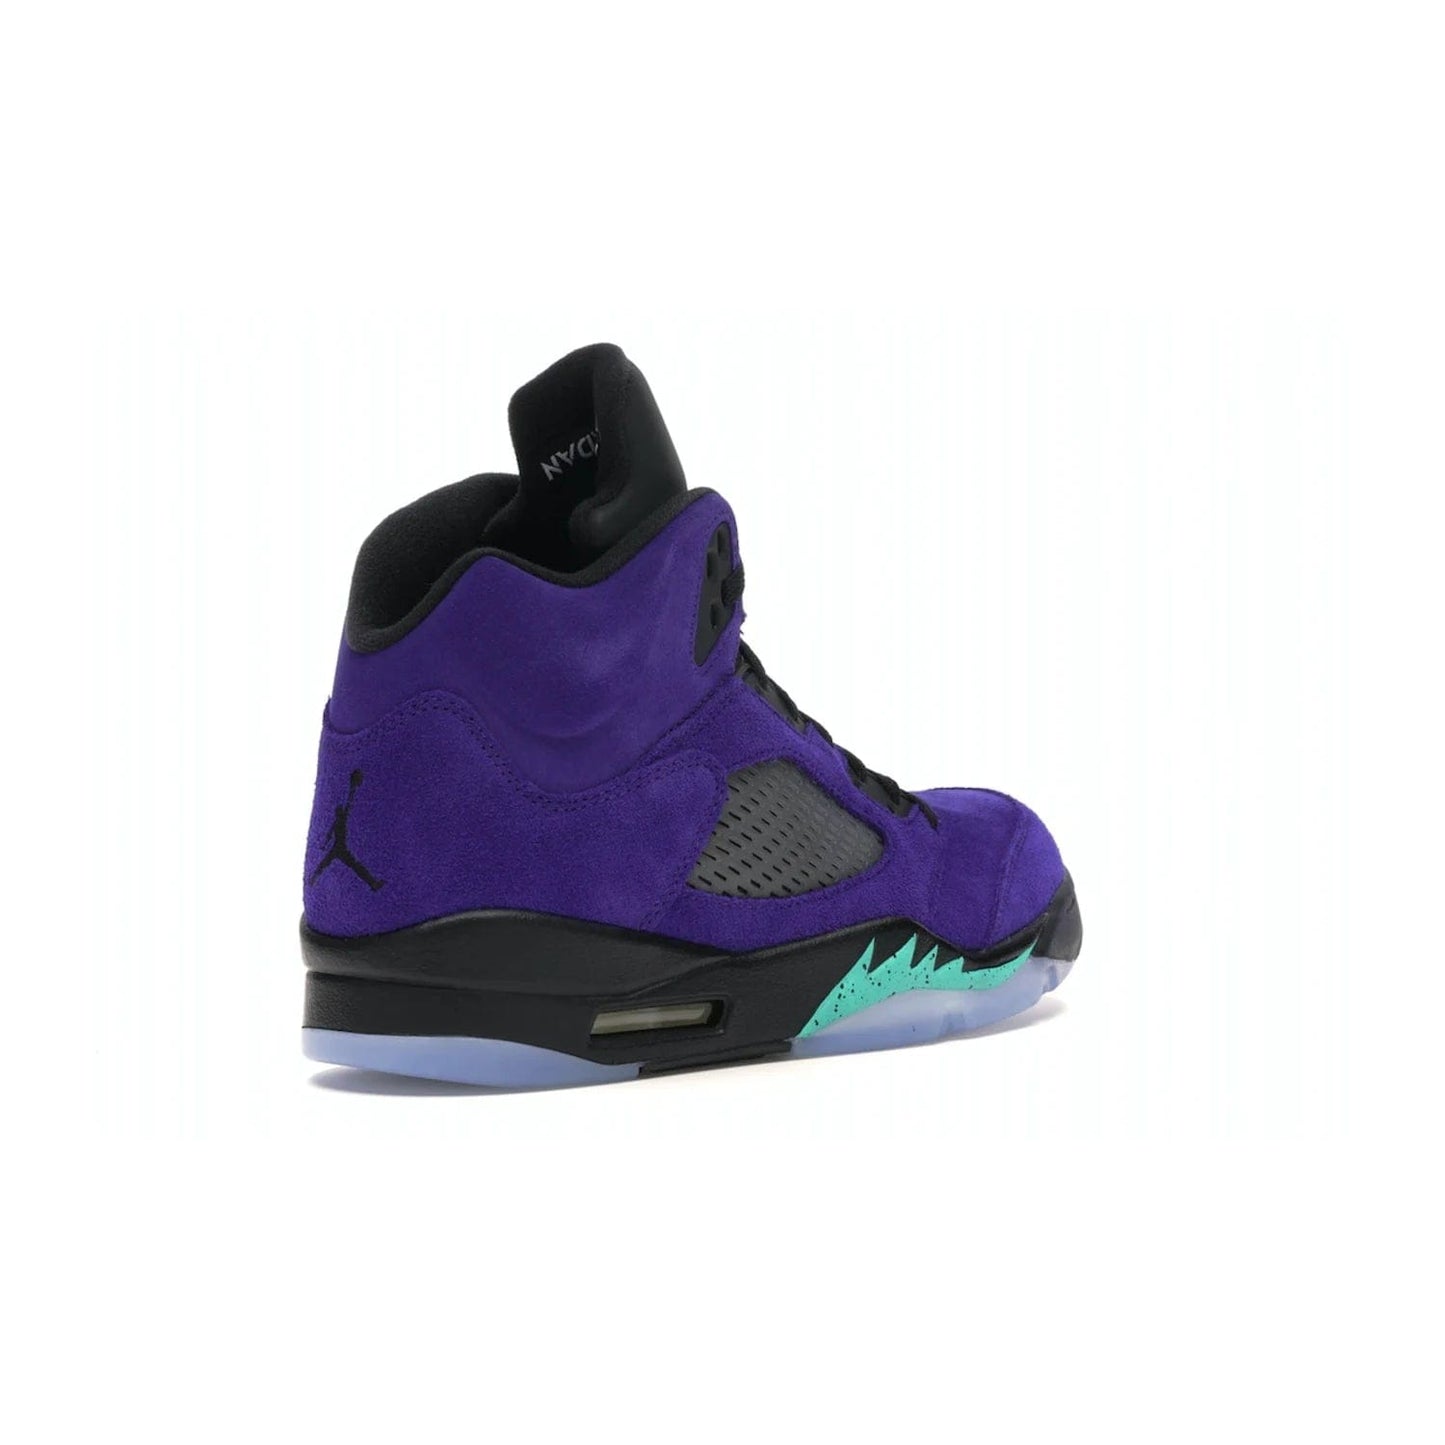 Jordan 5 Retro Alternate Grape - Image 32 - Only at www.BallersClubKickz.com - Bring the classic Jordan 5 Retro Alternate Grape to your sneaker collection! Featuring a purple suede upper, charcoal underlays, green detailing, and an icy and green outsole. Releasing for the first time since 1990, don't miss this chance to add a piece of sneaker history to your collection.